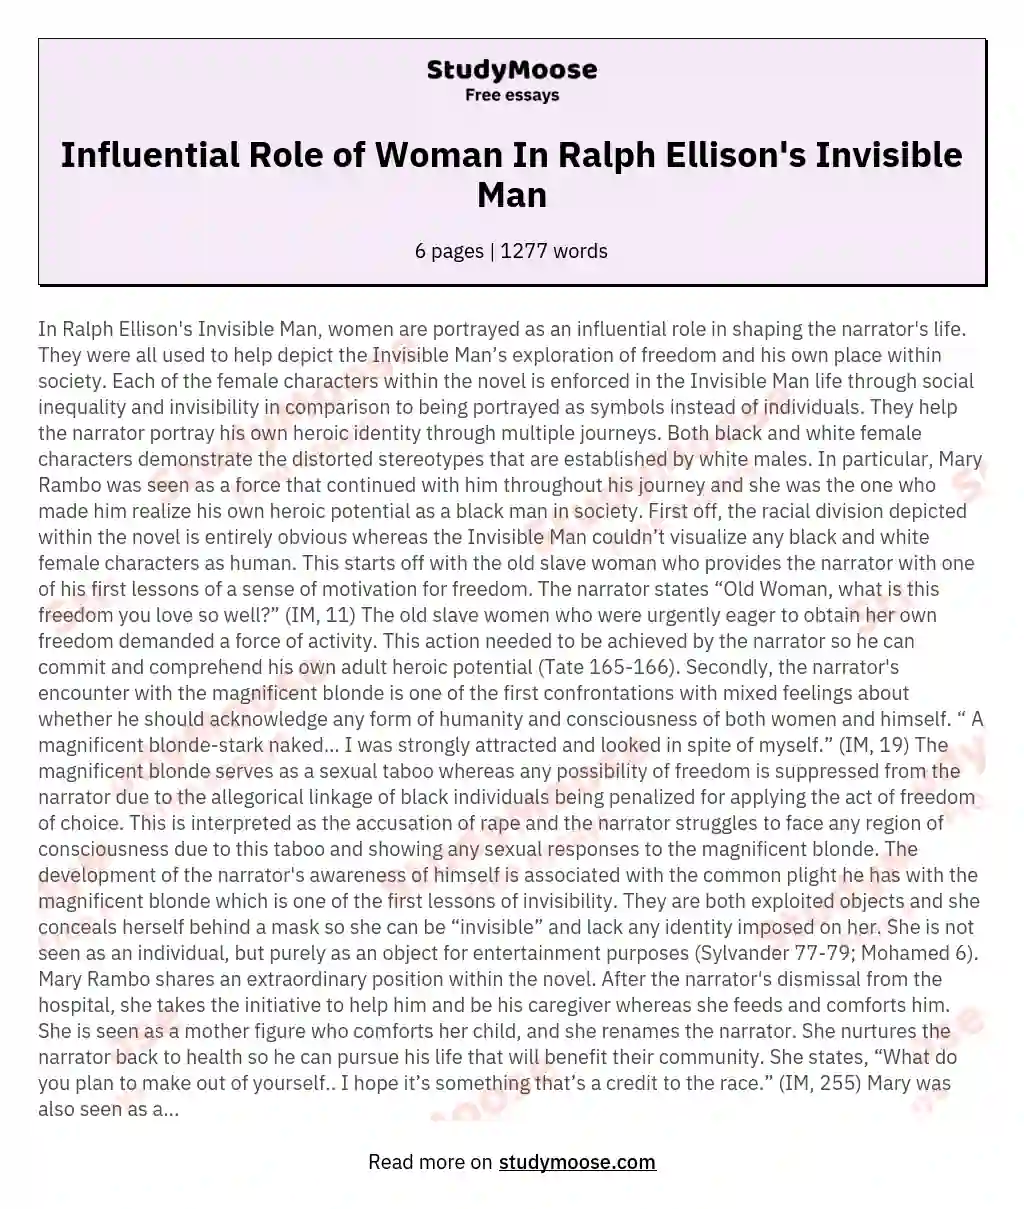 Influential Role of Woman In Ralph Ellison's Invisible Man